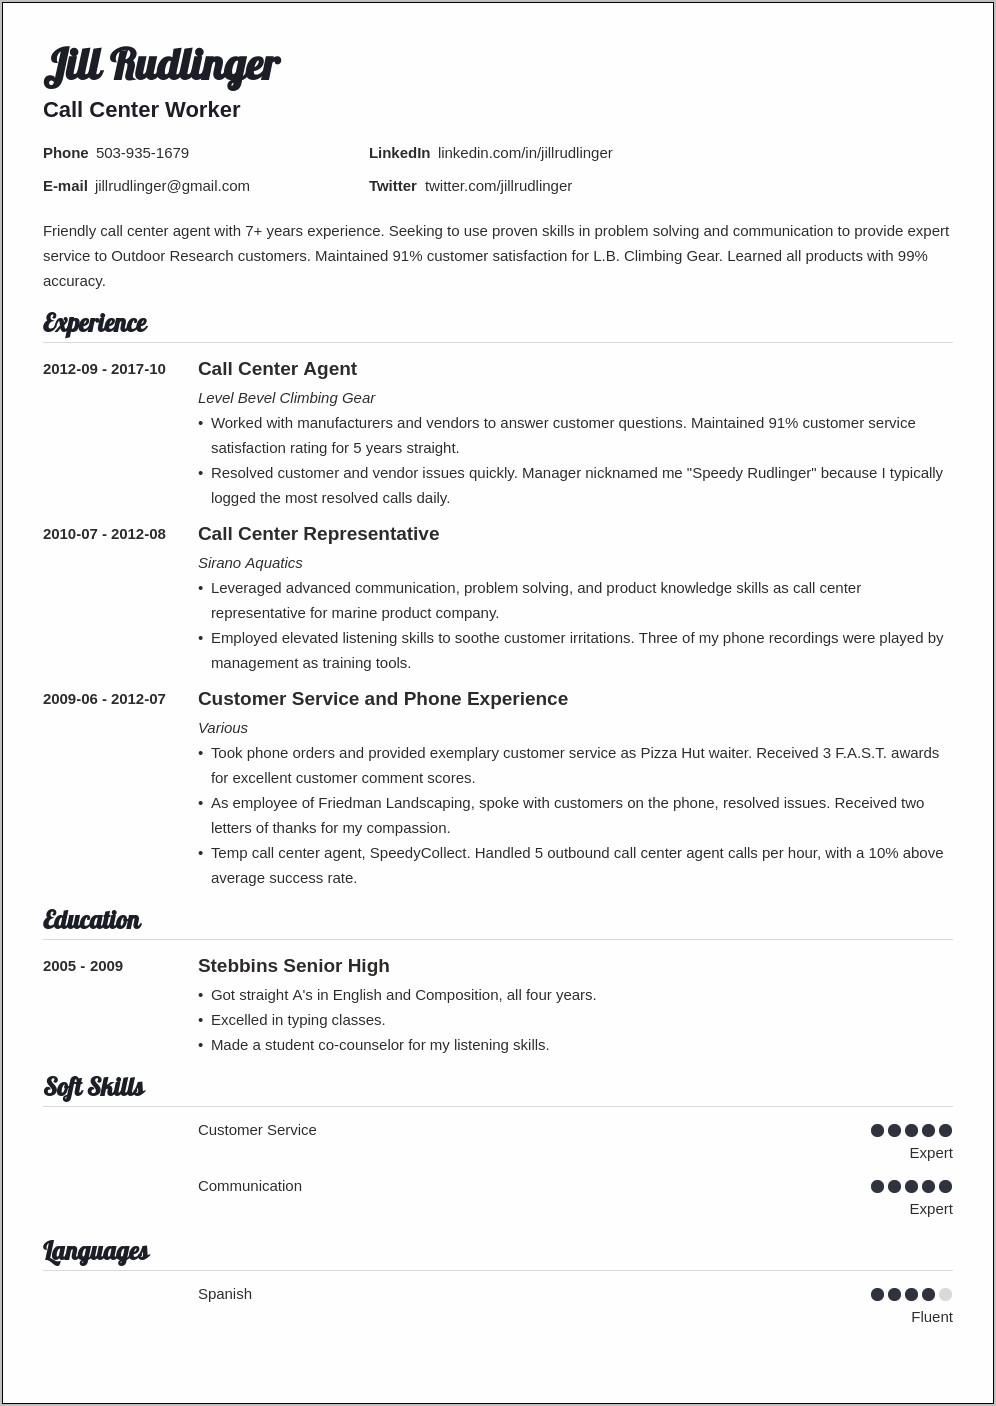 Sample Call Center Resume With Experience